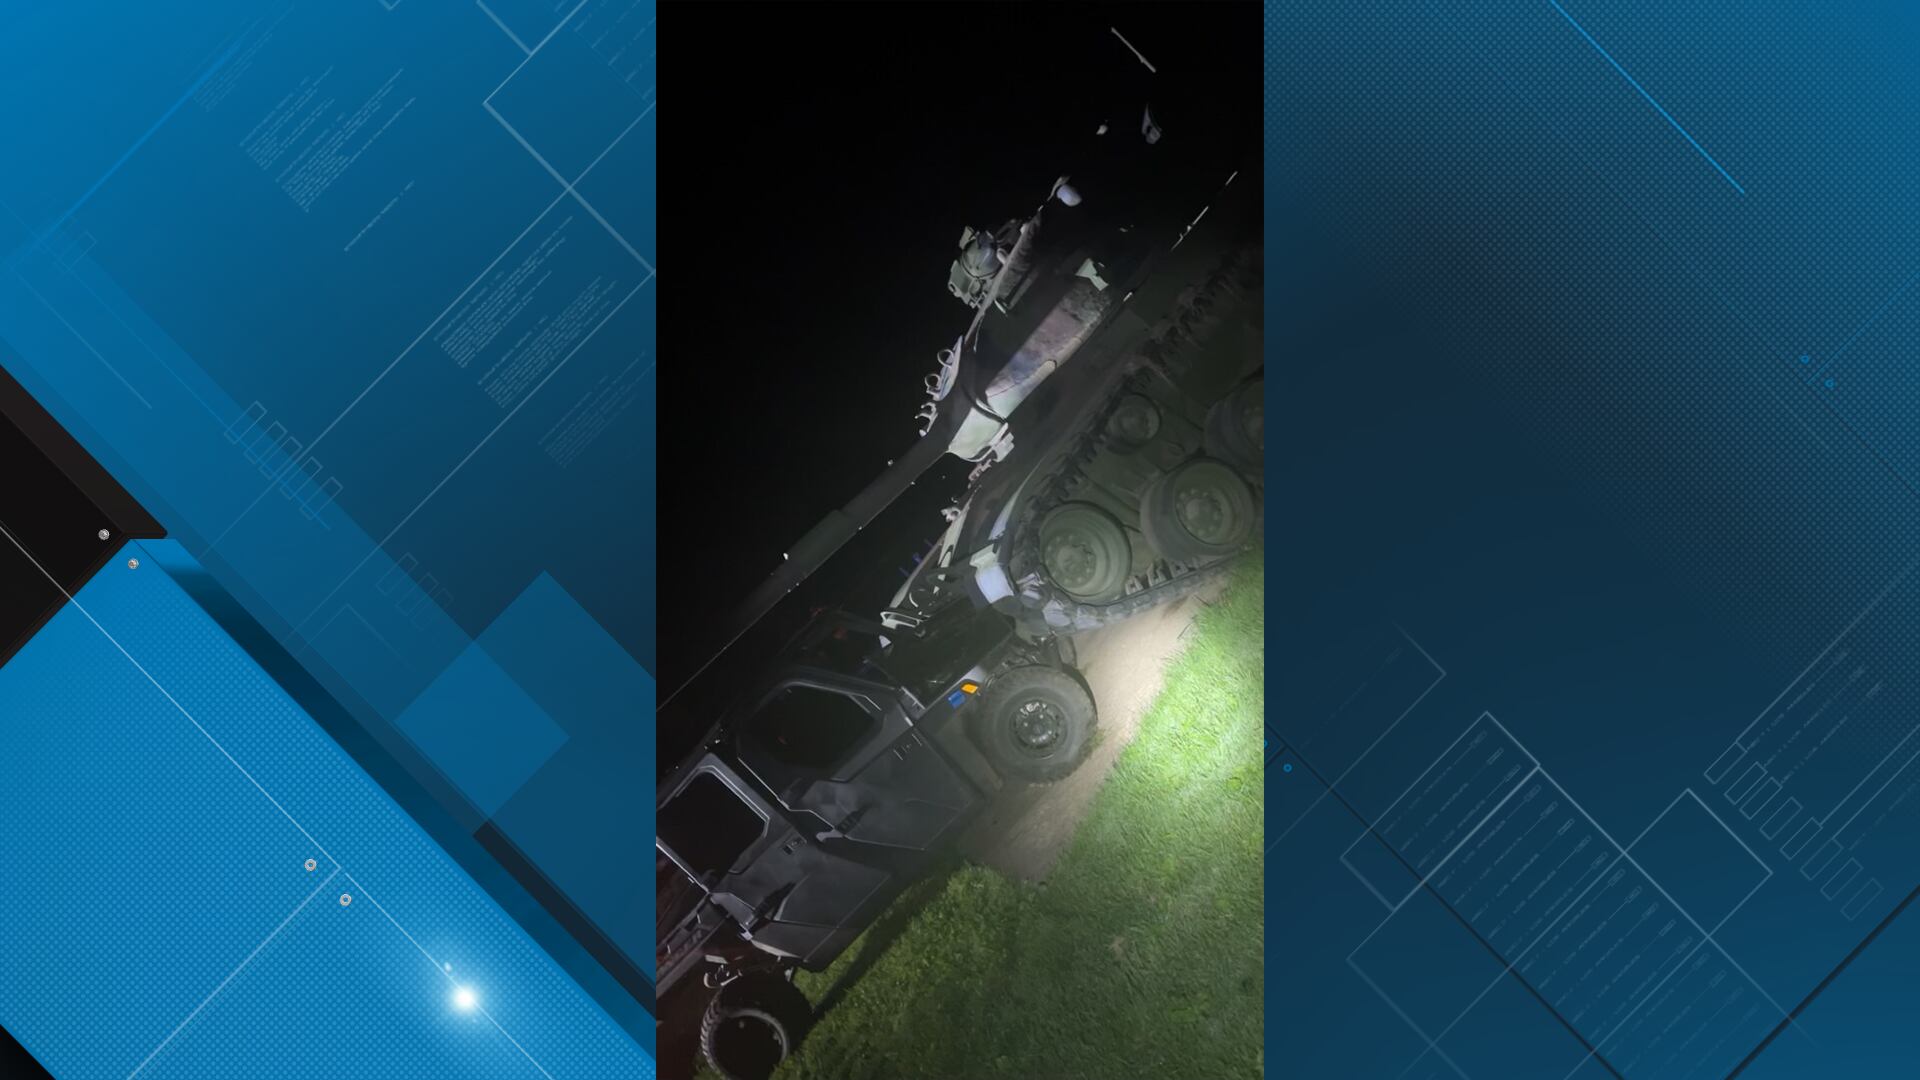 According to the Mondovi Police Department, a UTV hit a tank on display at the Veterans...